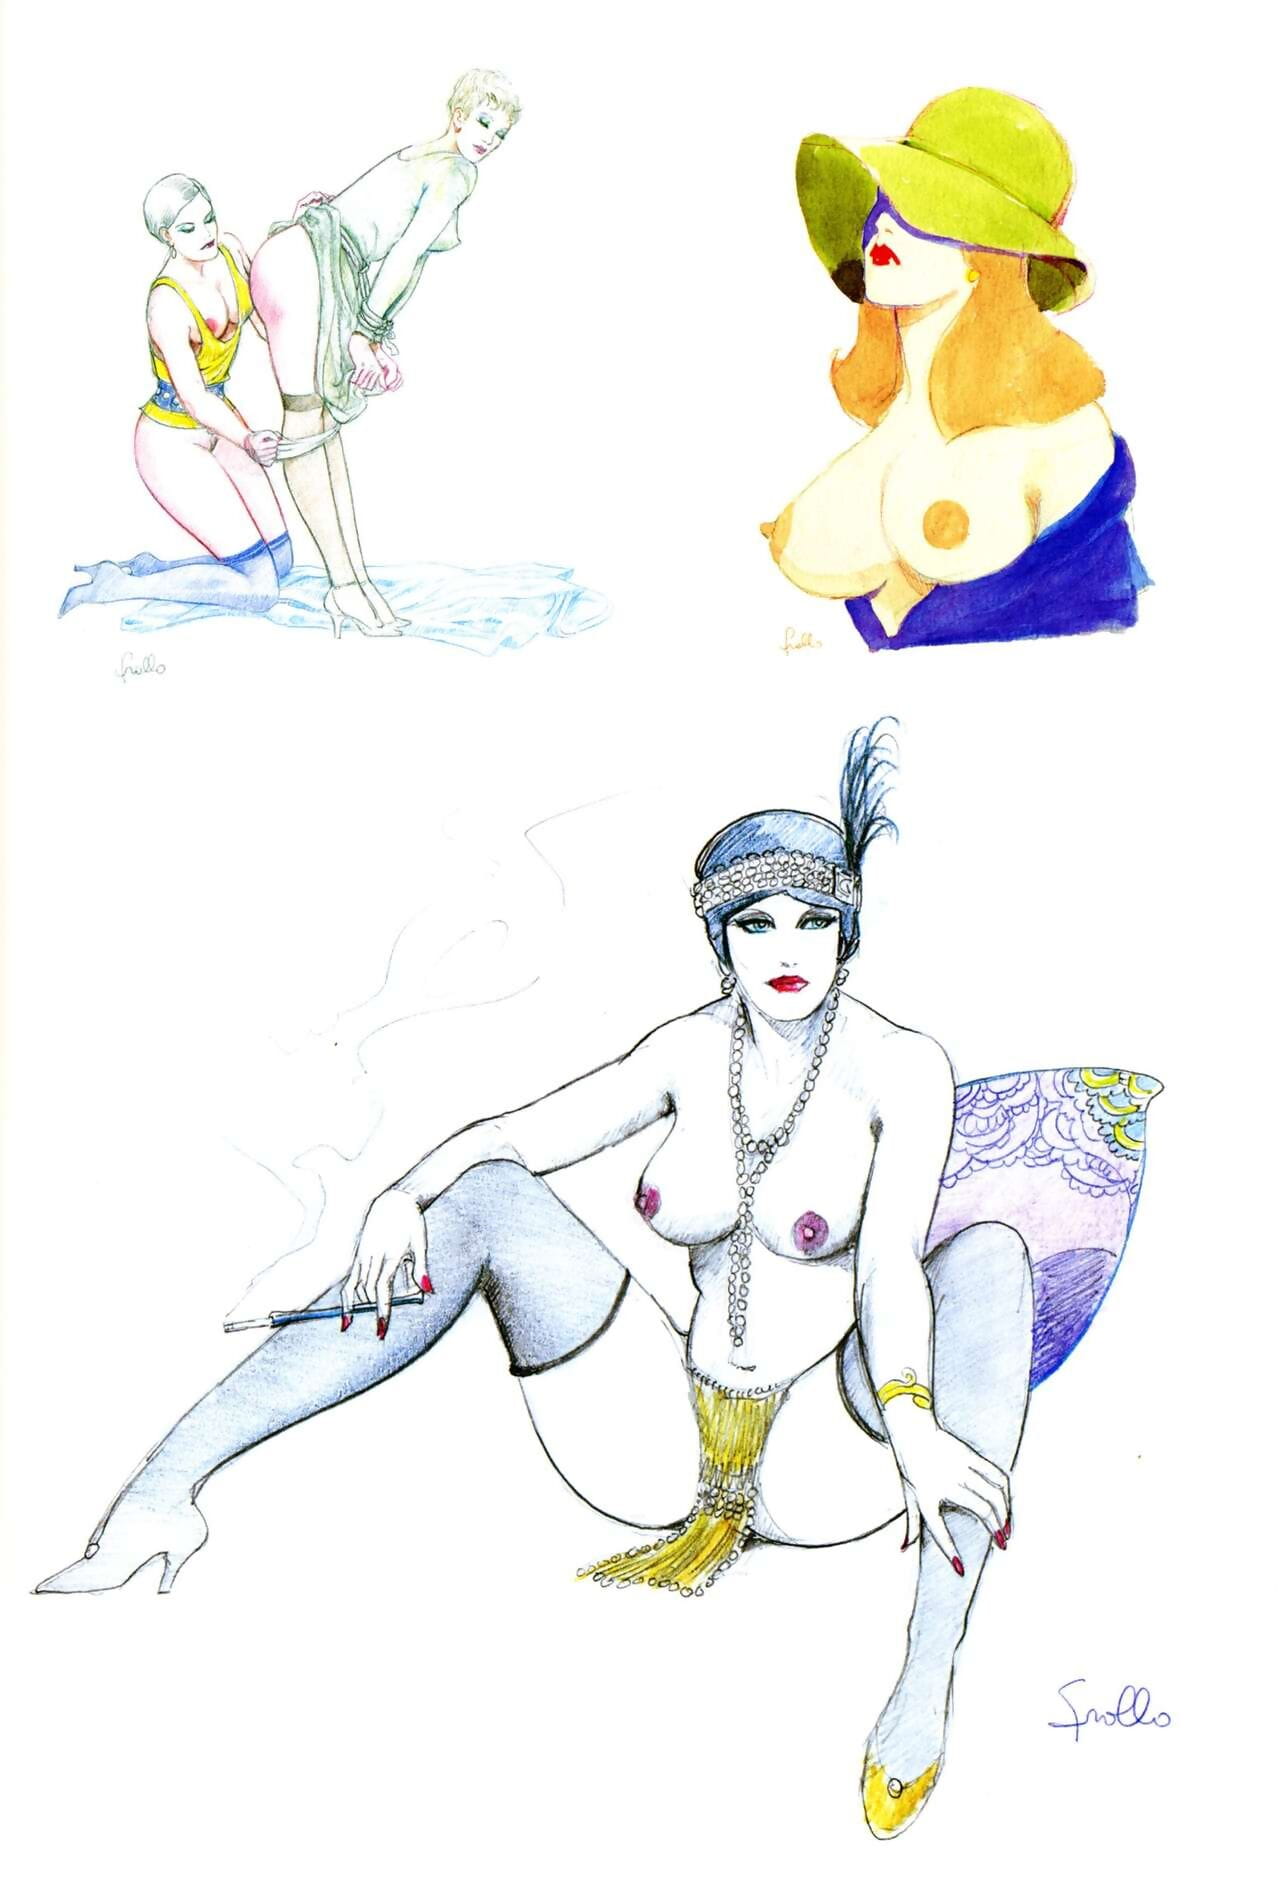 The Women of Leone Frollo page 1